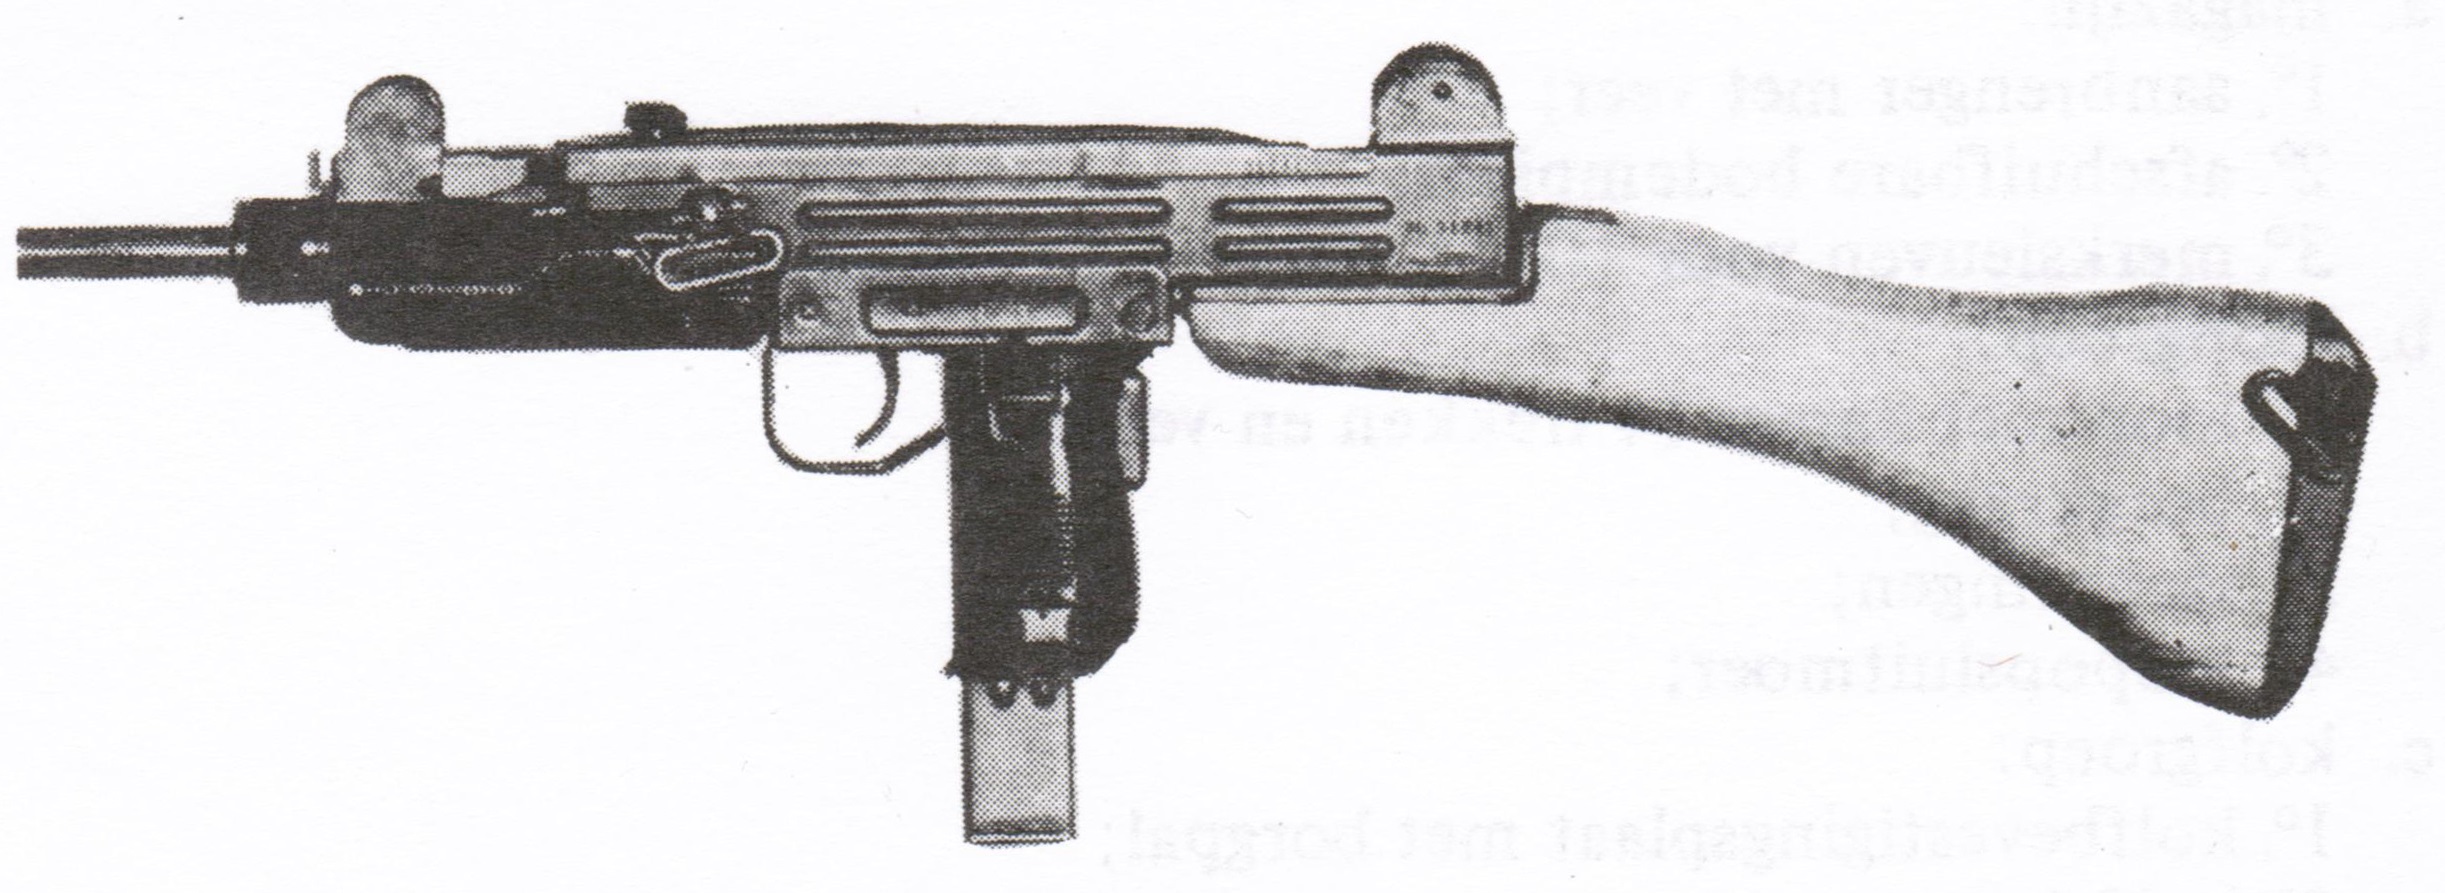 The UZI as used by the Dutch Navy and Marines: wooden stock and 25-round magazines